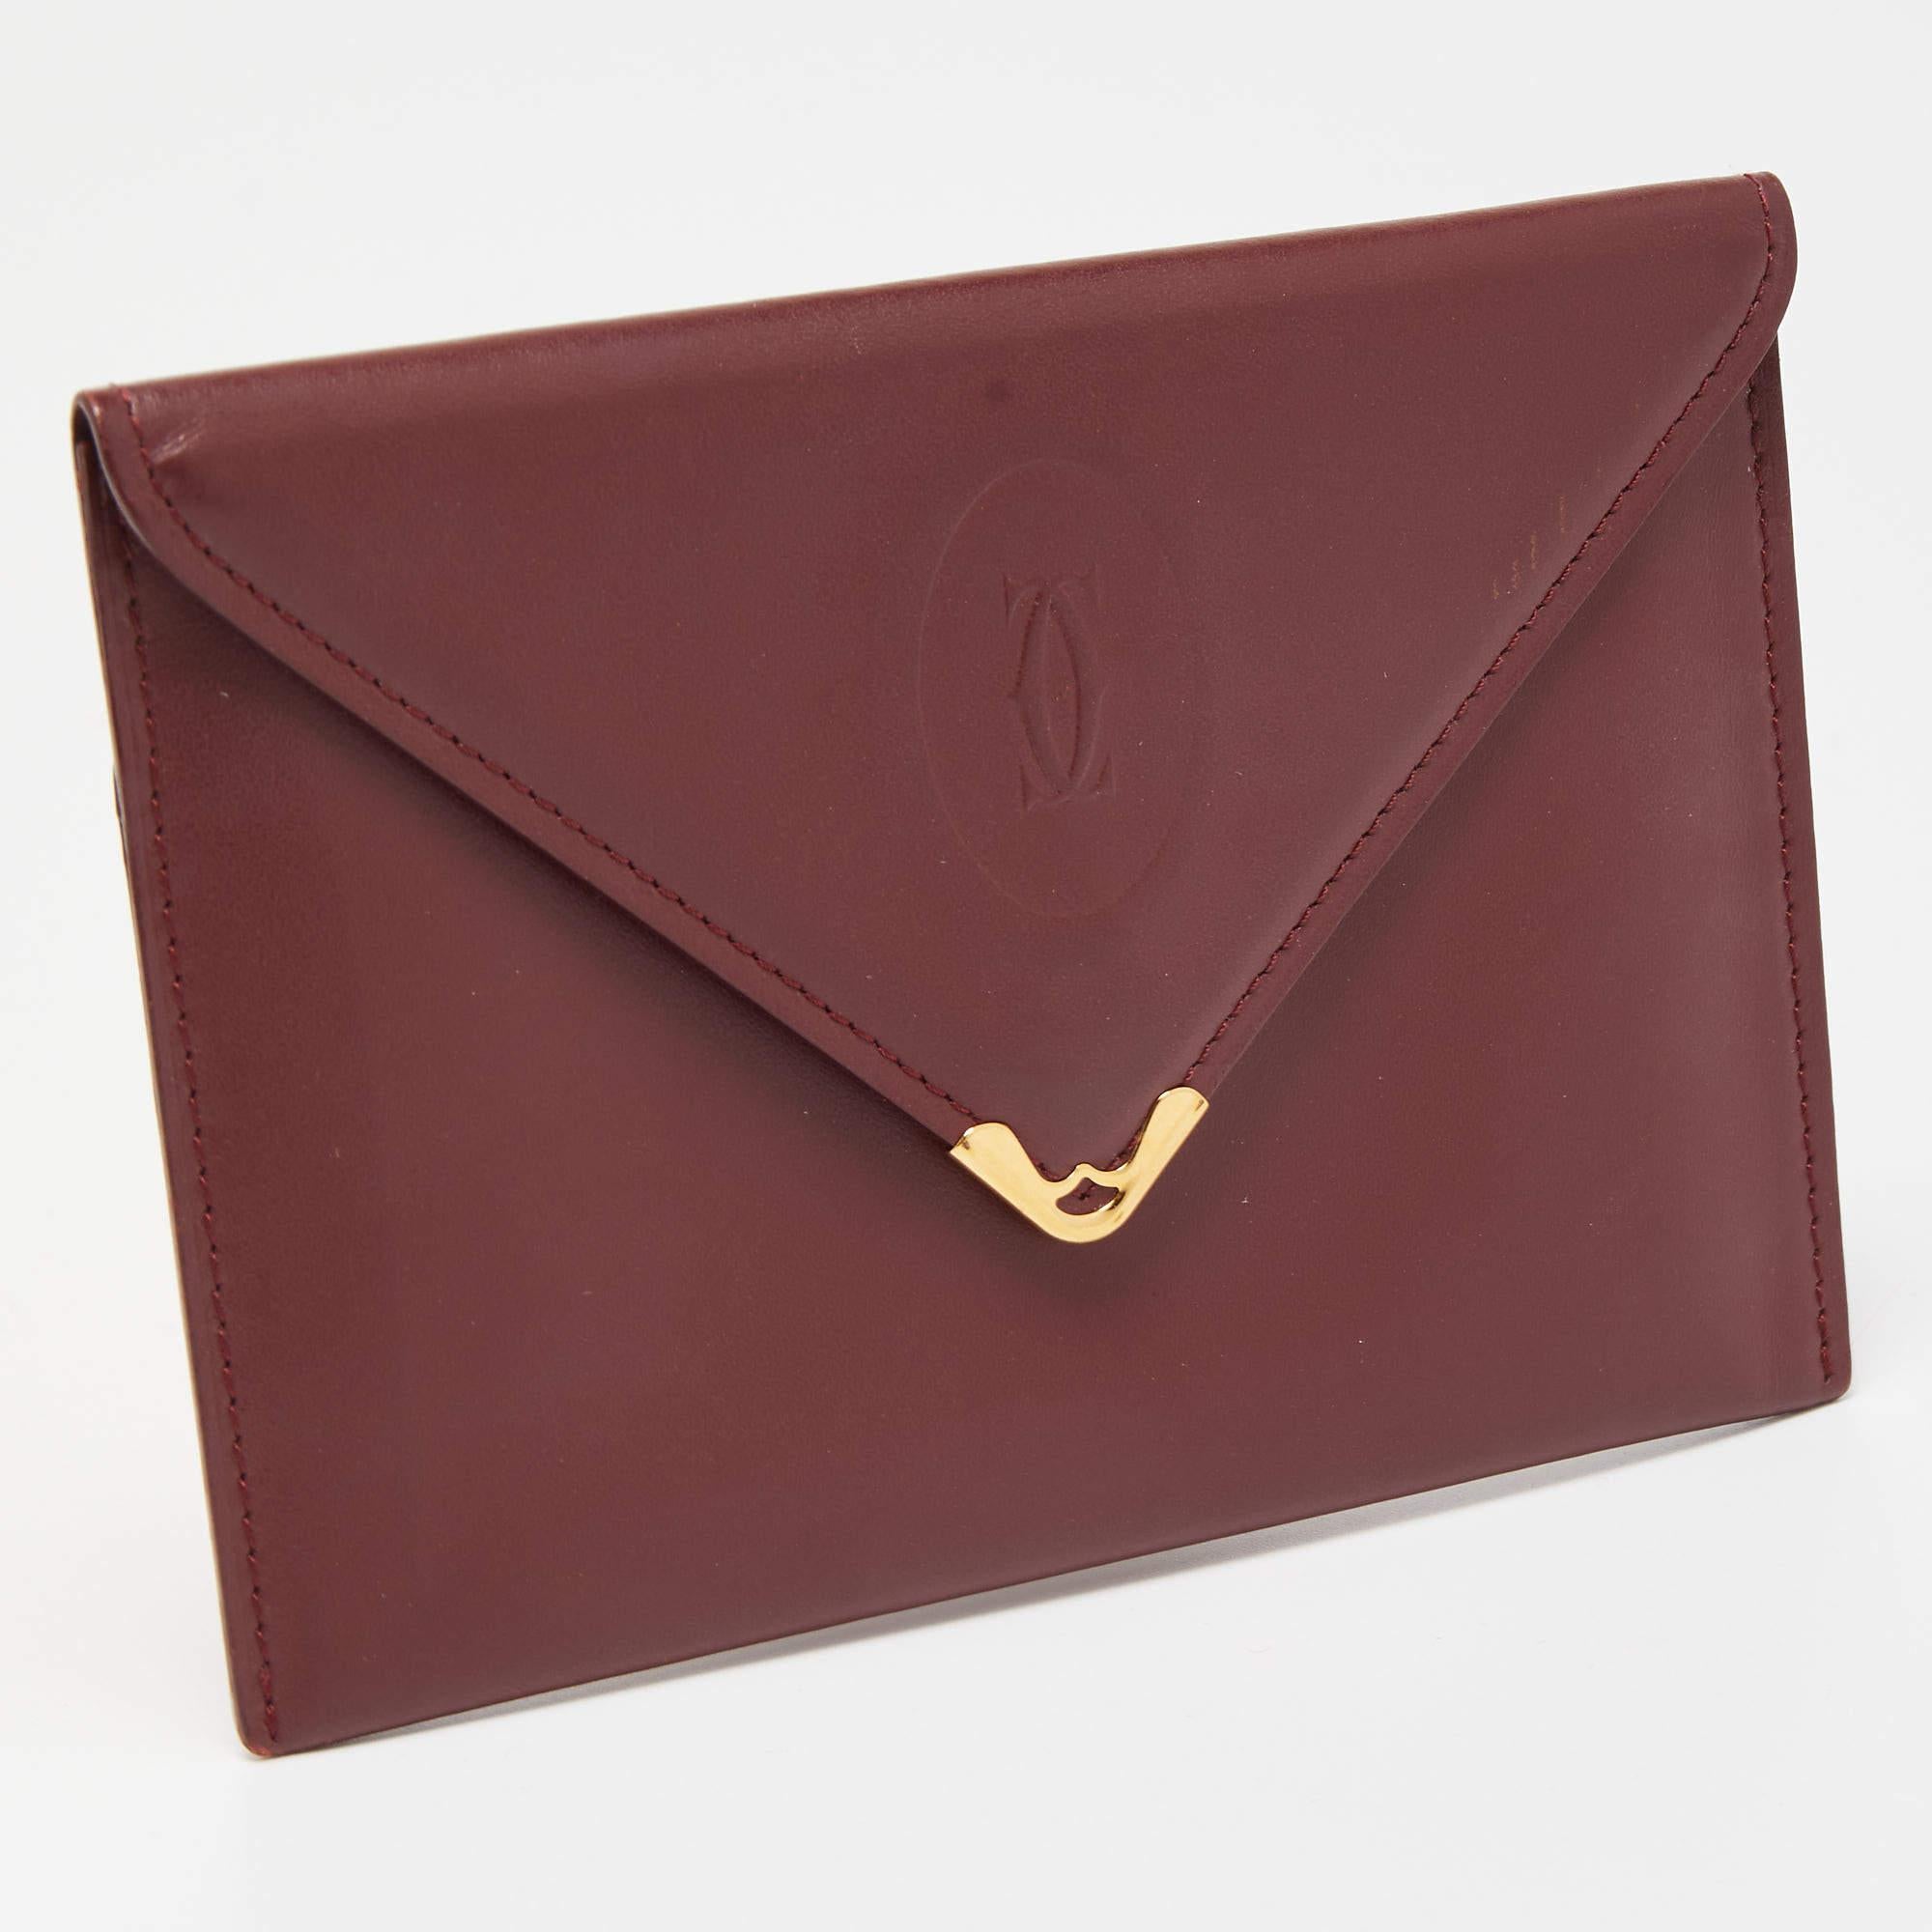 This Cartier burgundy wallet is a luxurious accessory that will prove to be super functional. It is made using durable materials on the exterior and unveils a well-organized interior.

